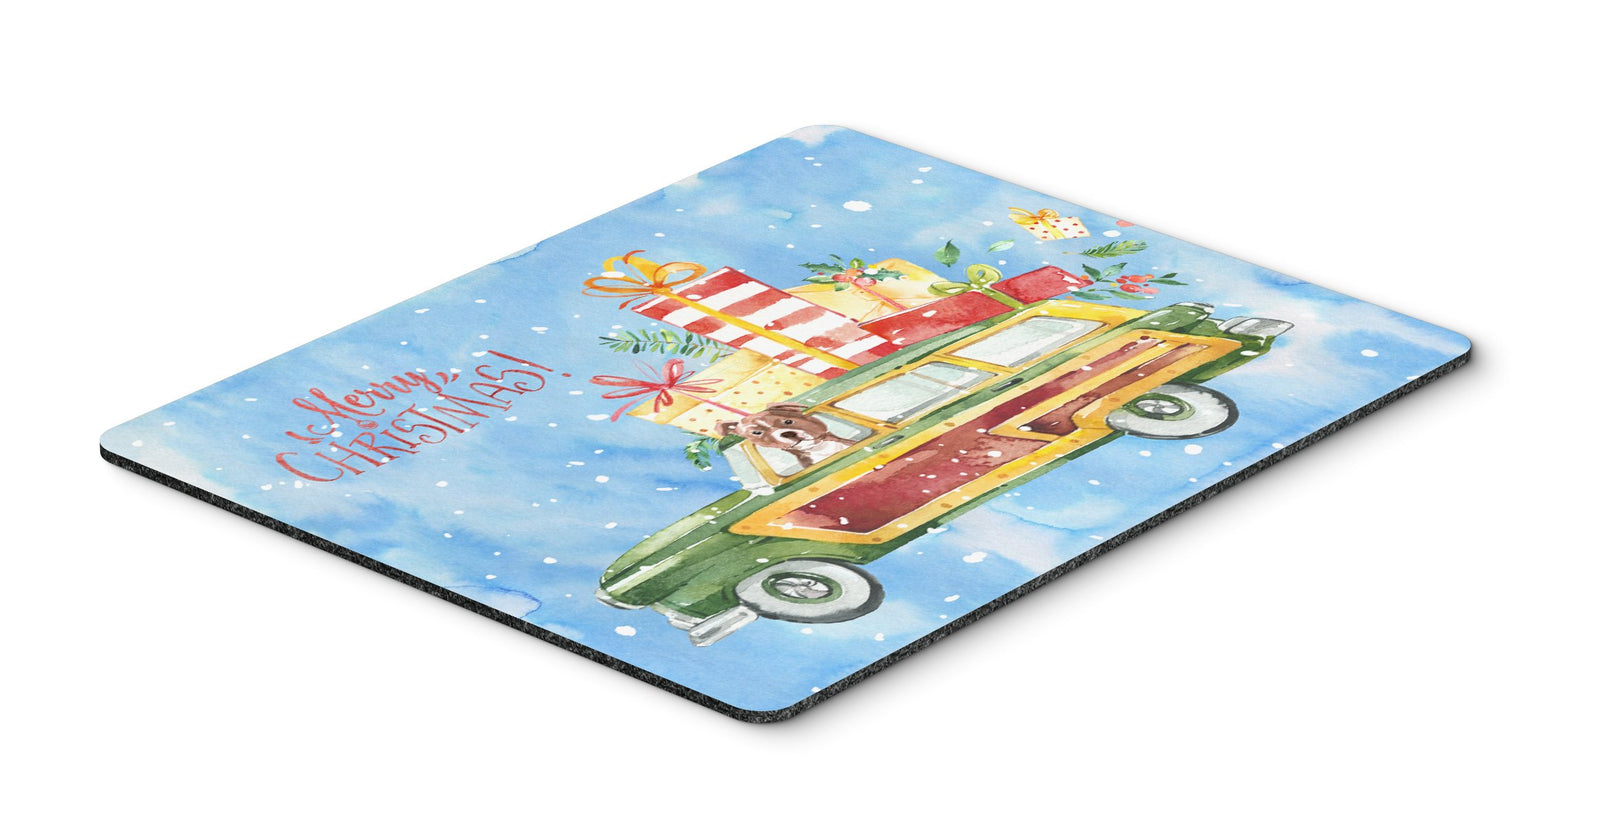 Merry Christmas Red Staffie Bull Terrier Mouse Pad, Hot Pad or Trivet CK2464MP by Caroline's Treasures